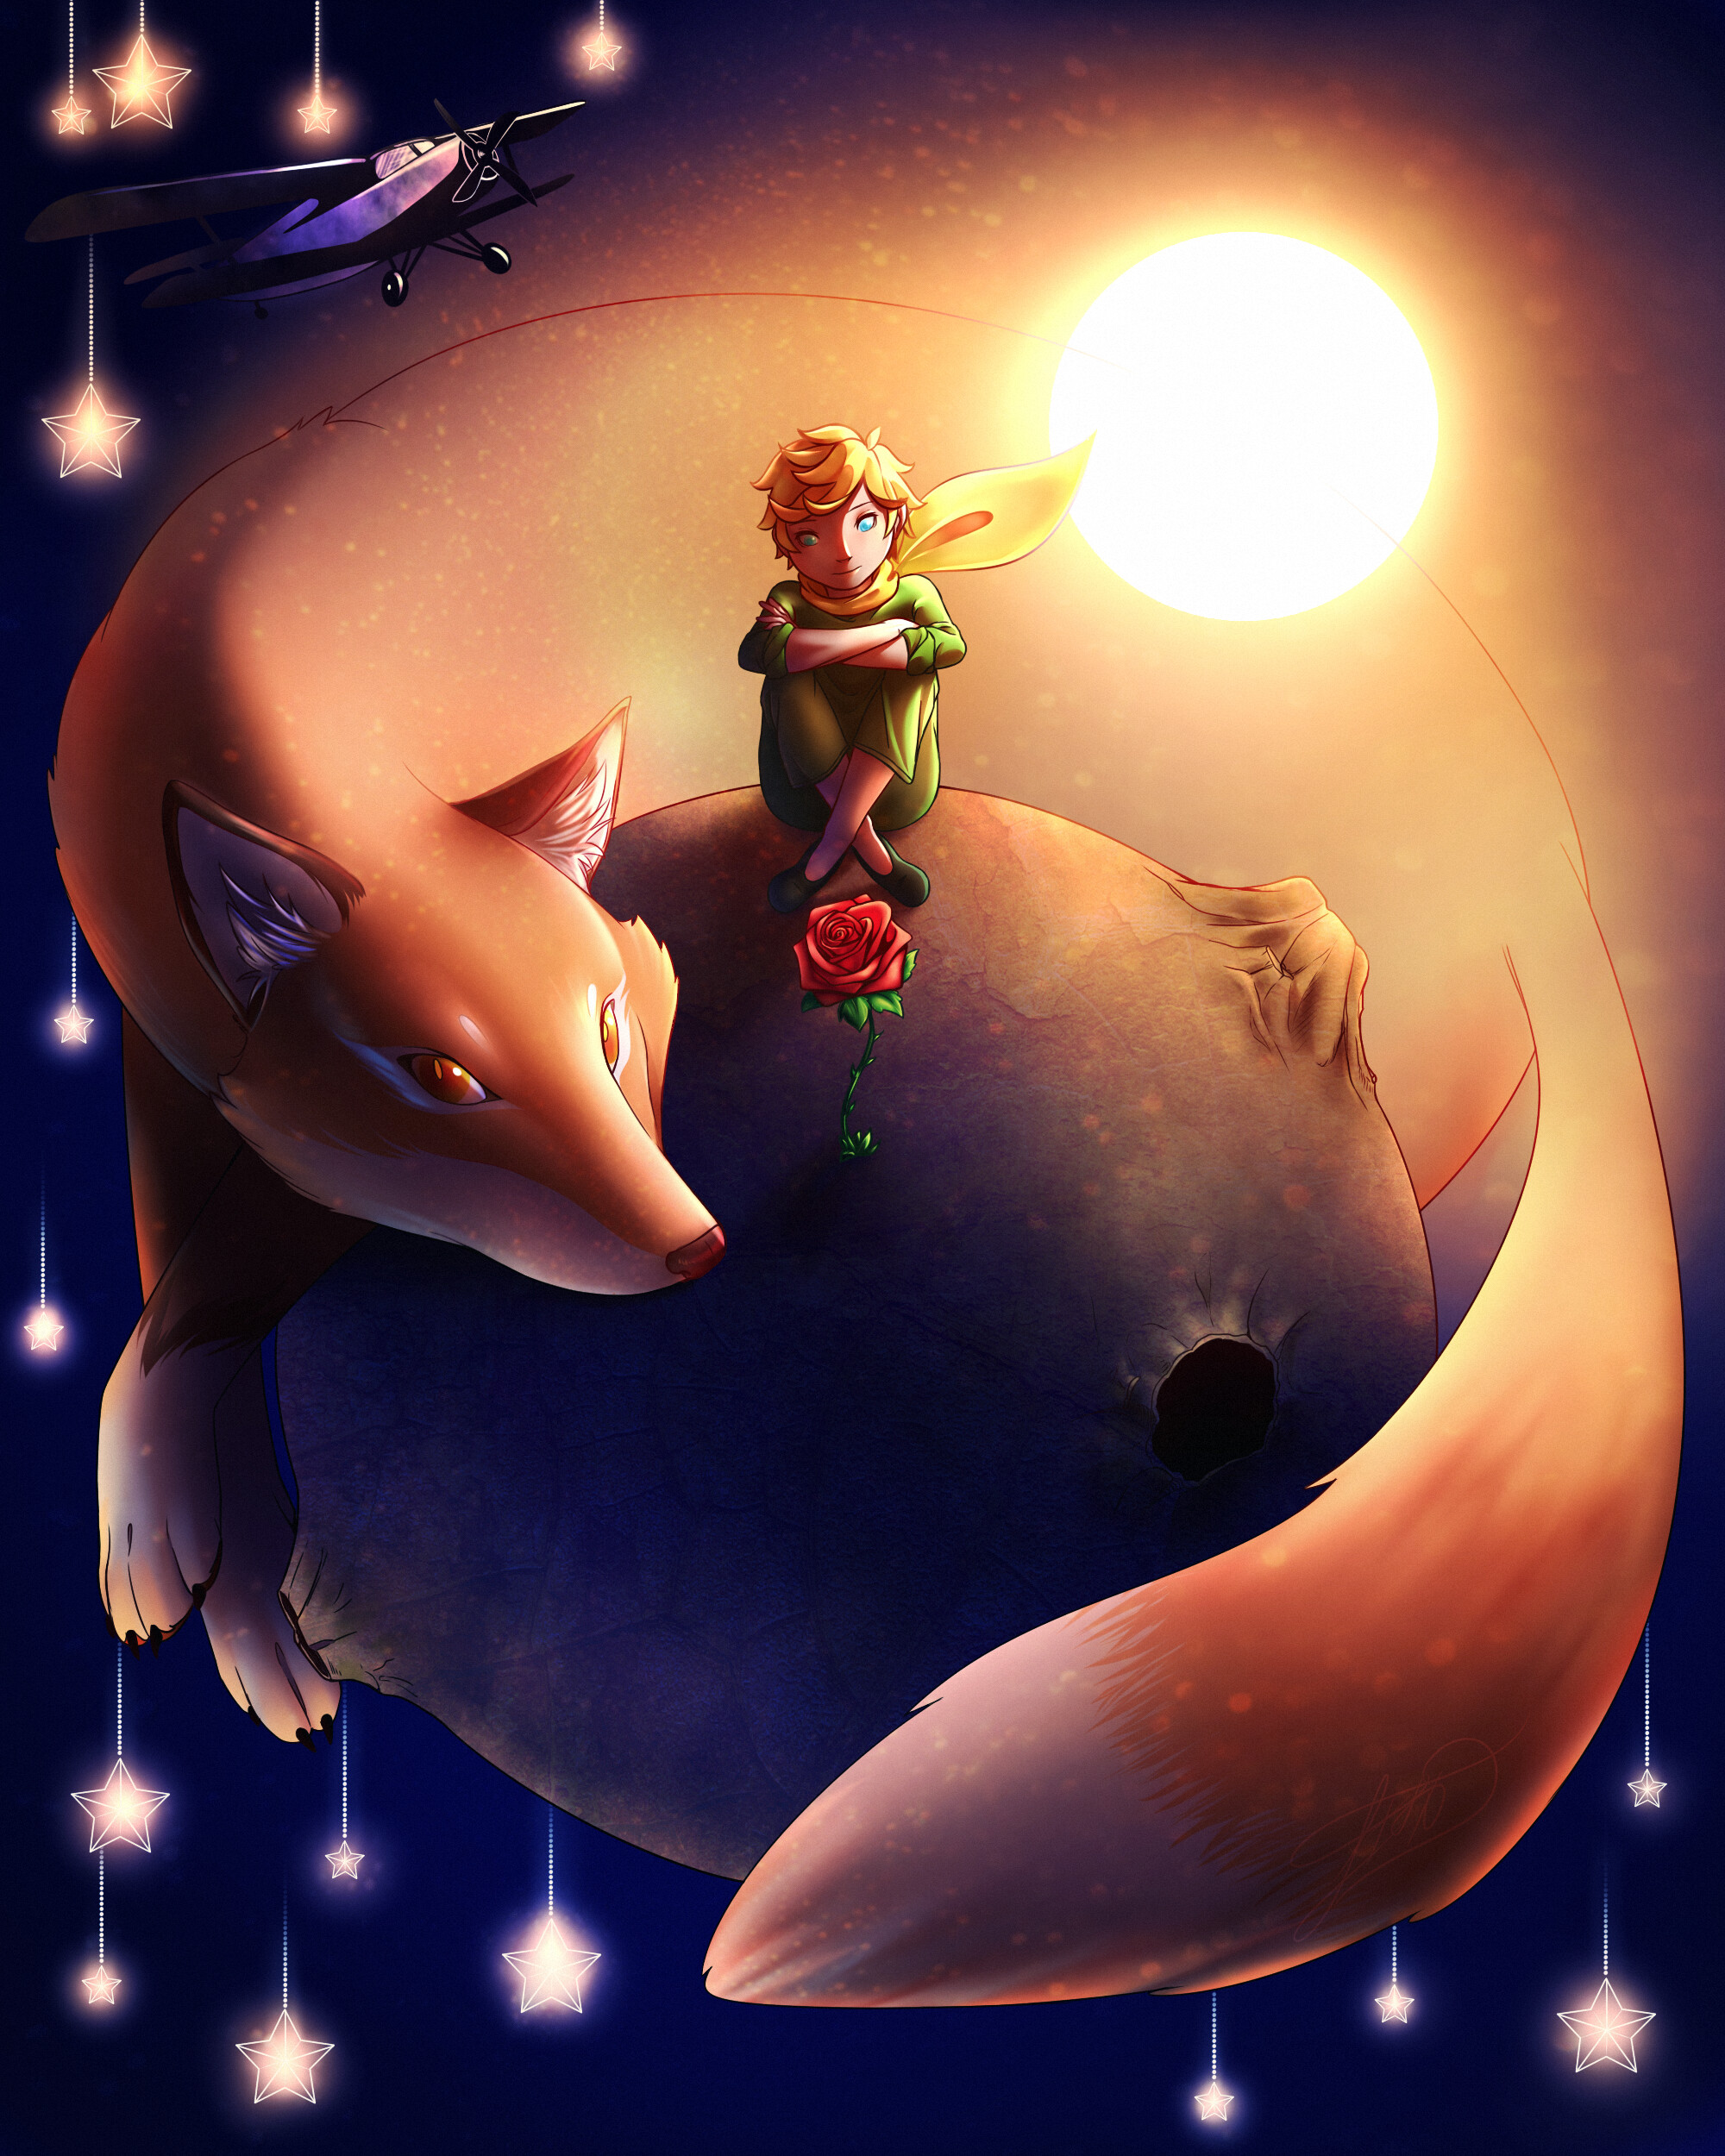 The Little Prince: The film has received positive reviews, earning praise for its style of animation and homage paid to the source material, Directed by Mark Osborne. 2000x2500 HD Wallpaper.